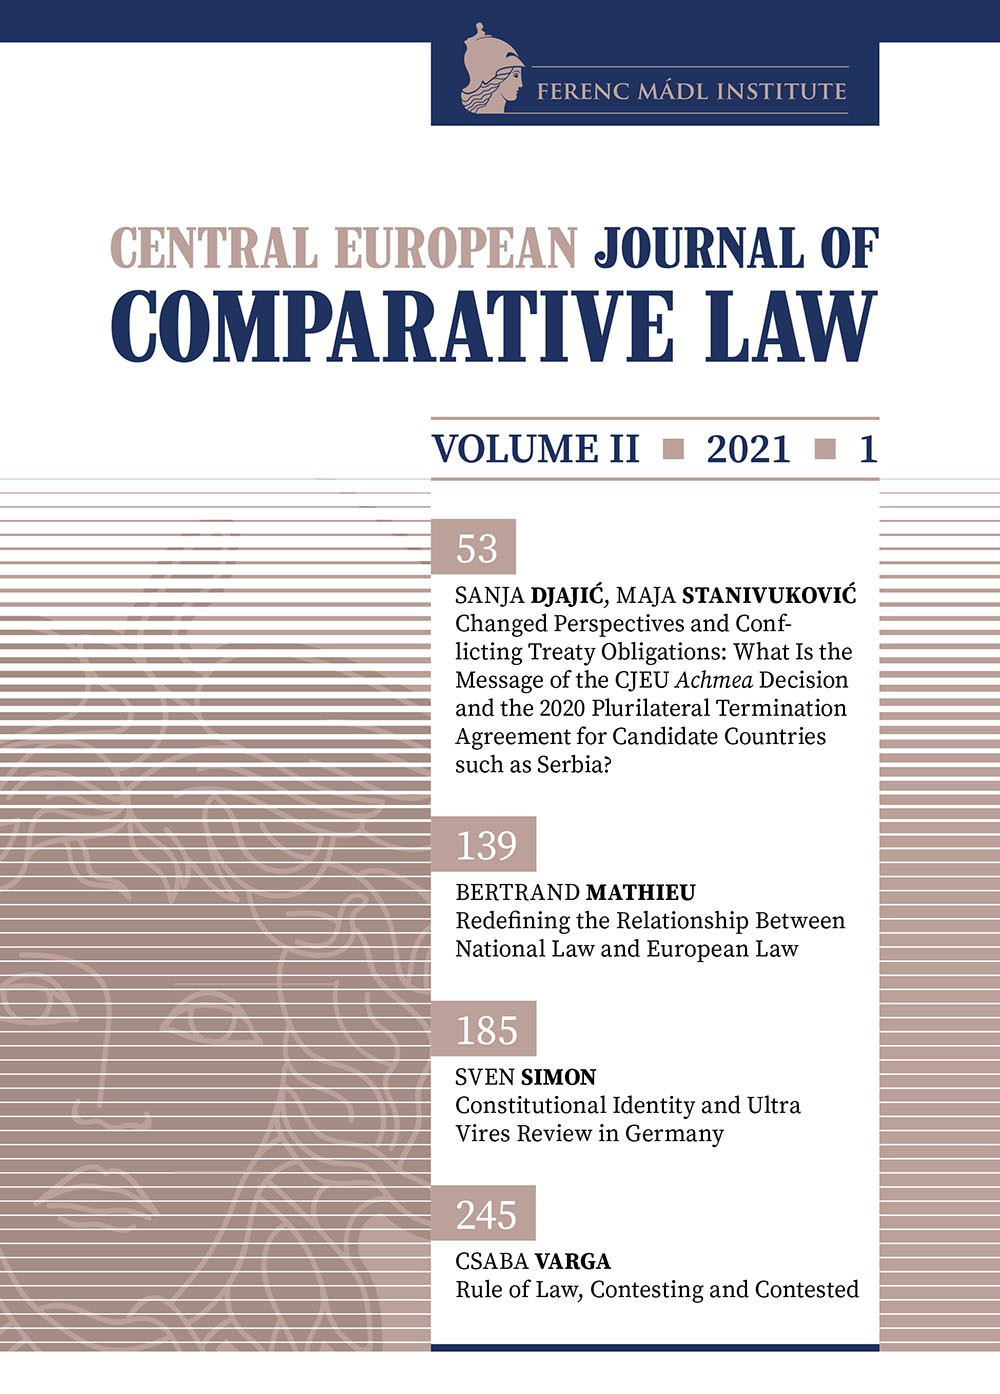 International and European Norms on the Rule of Law from the Perspective of the Republic of Serbia